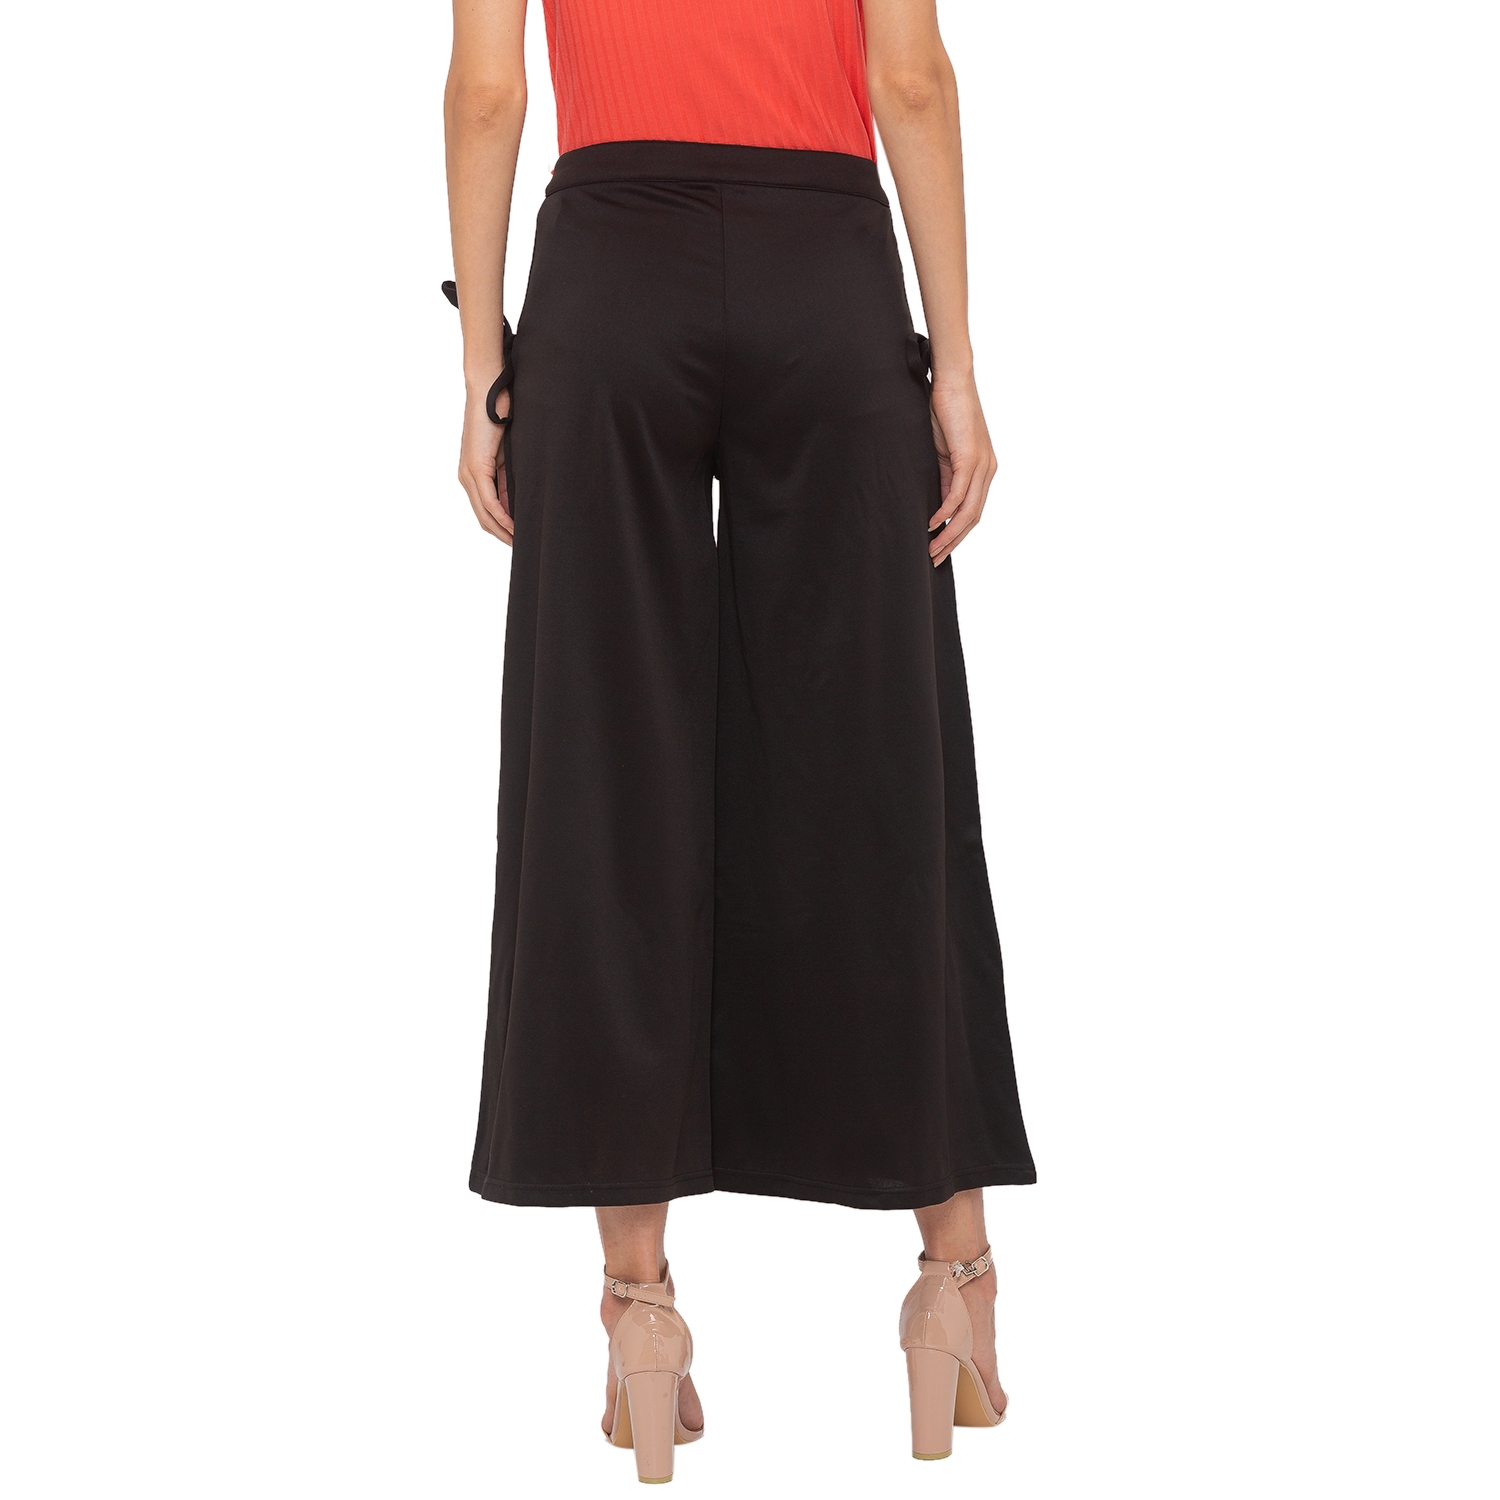 globus | Women's Black Polyester Solid Culottes 2